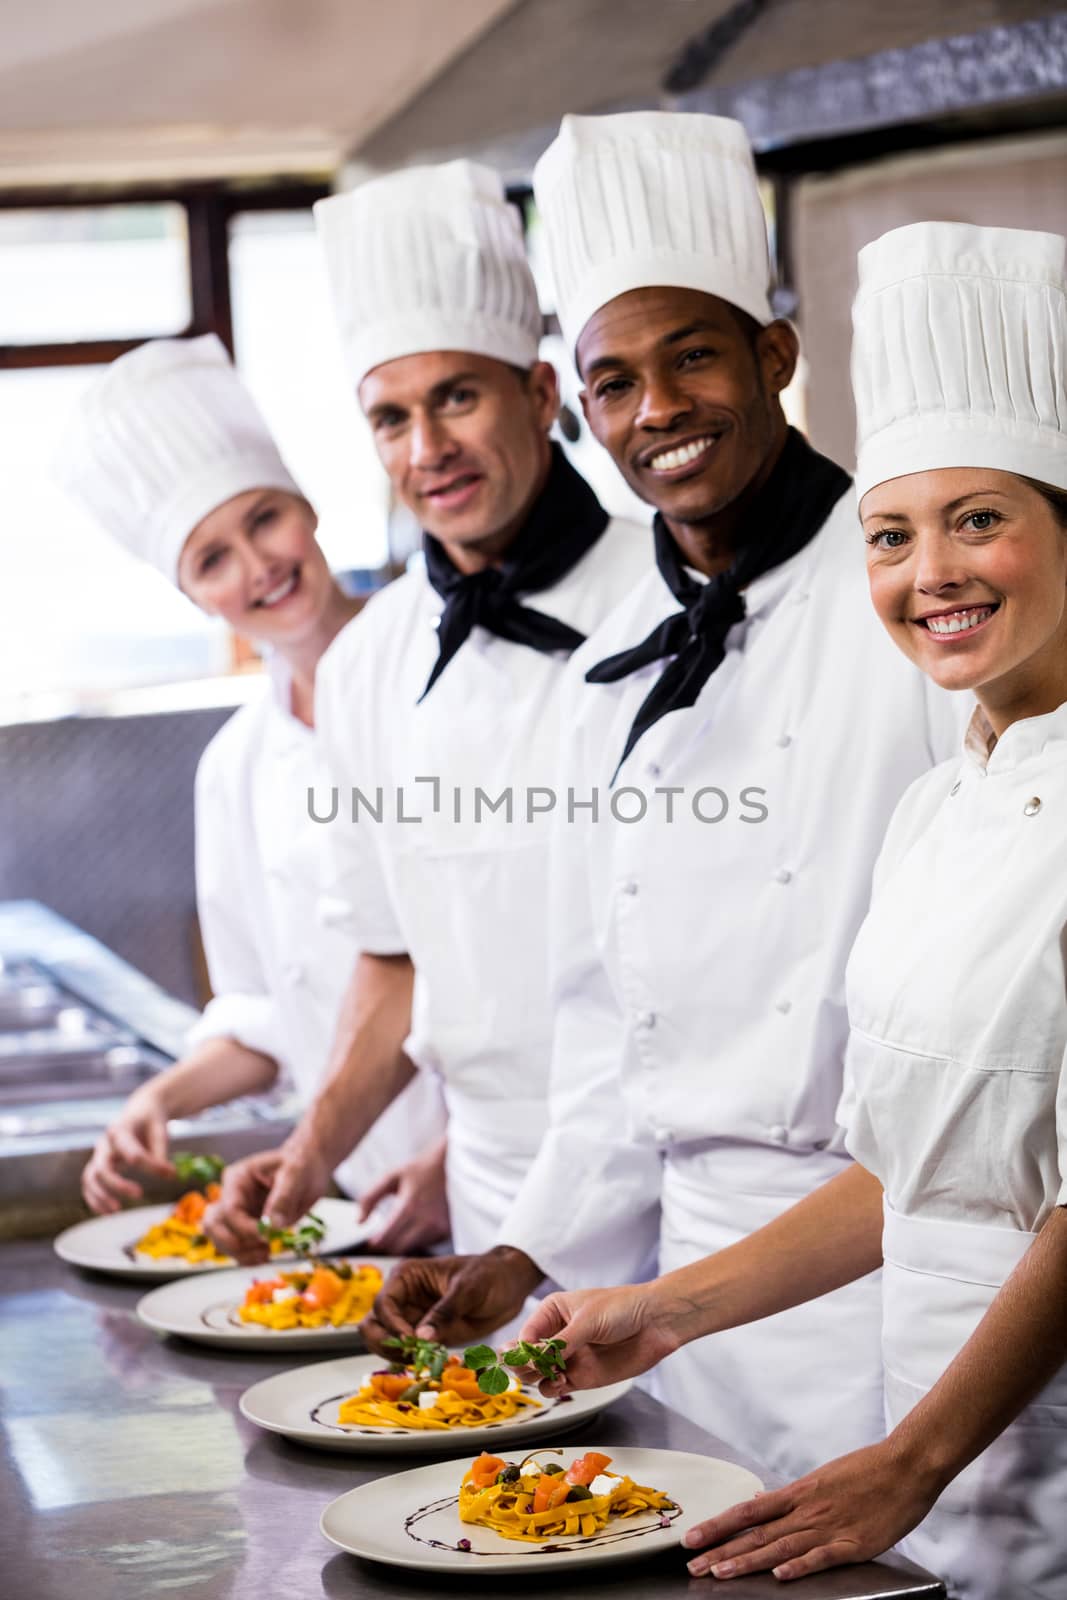 Group of chefs holding plate of prepared pasta in kitchen at hotel